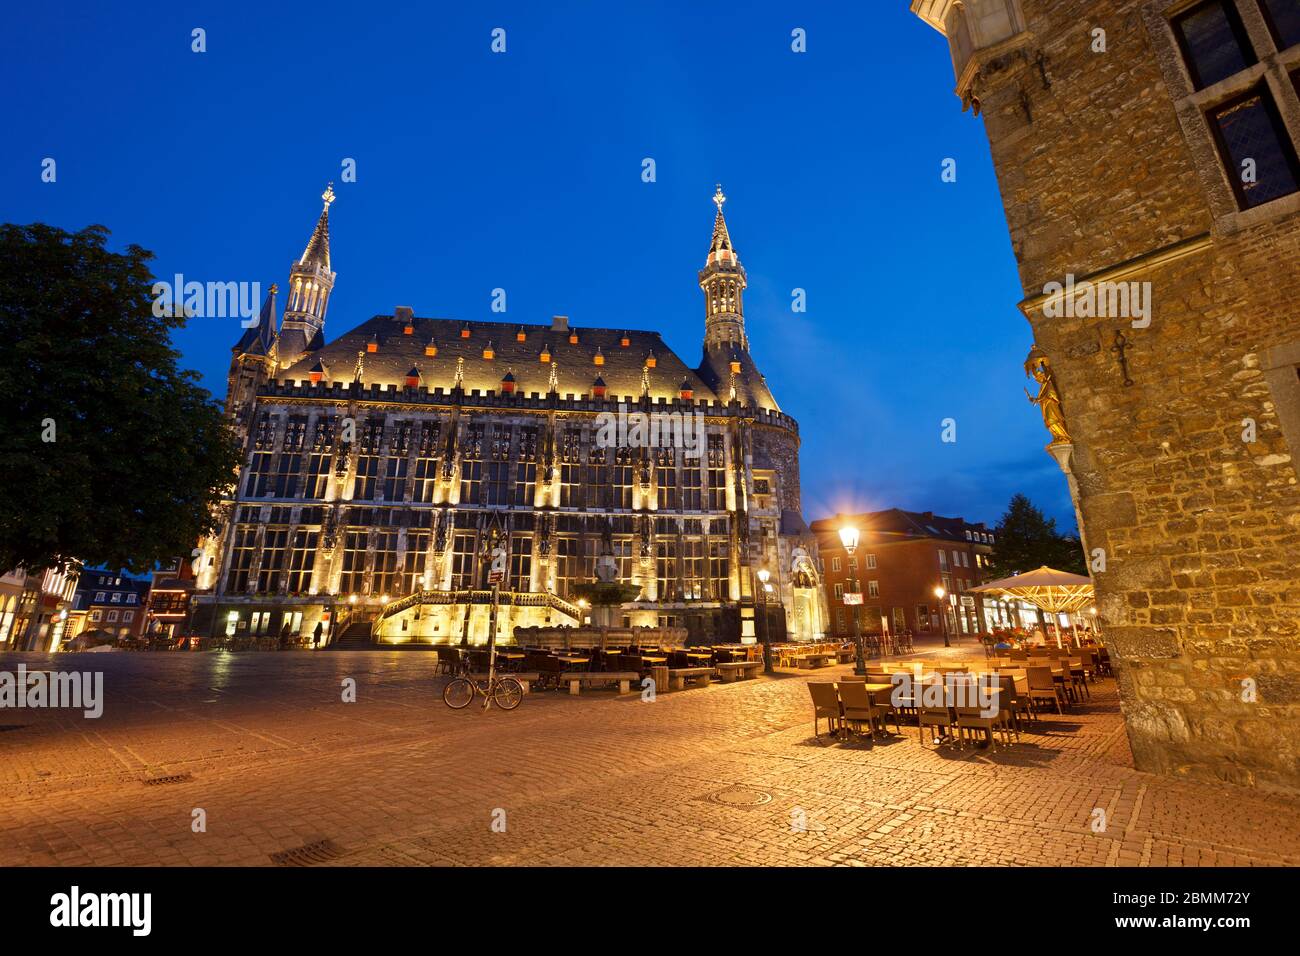 The town hall of Aachen with night blue sky and illumination in Germany seen from the market square. Stock Photo